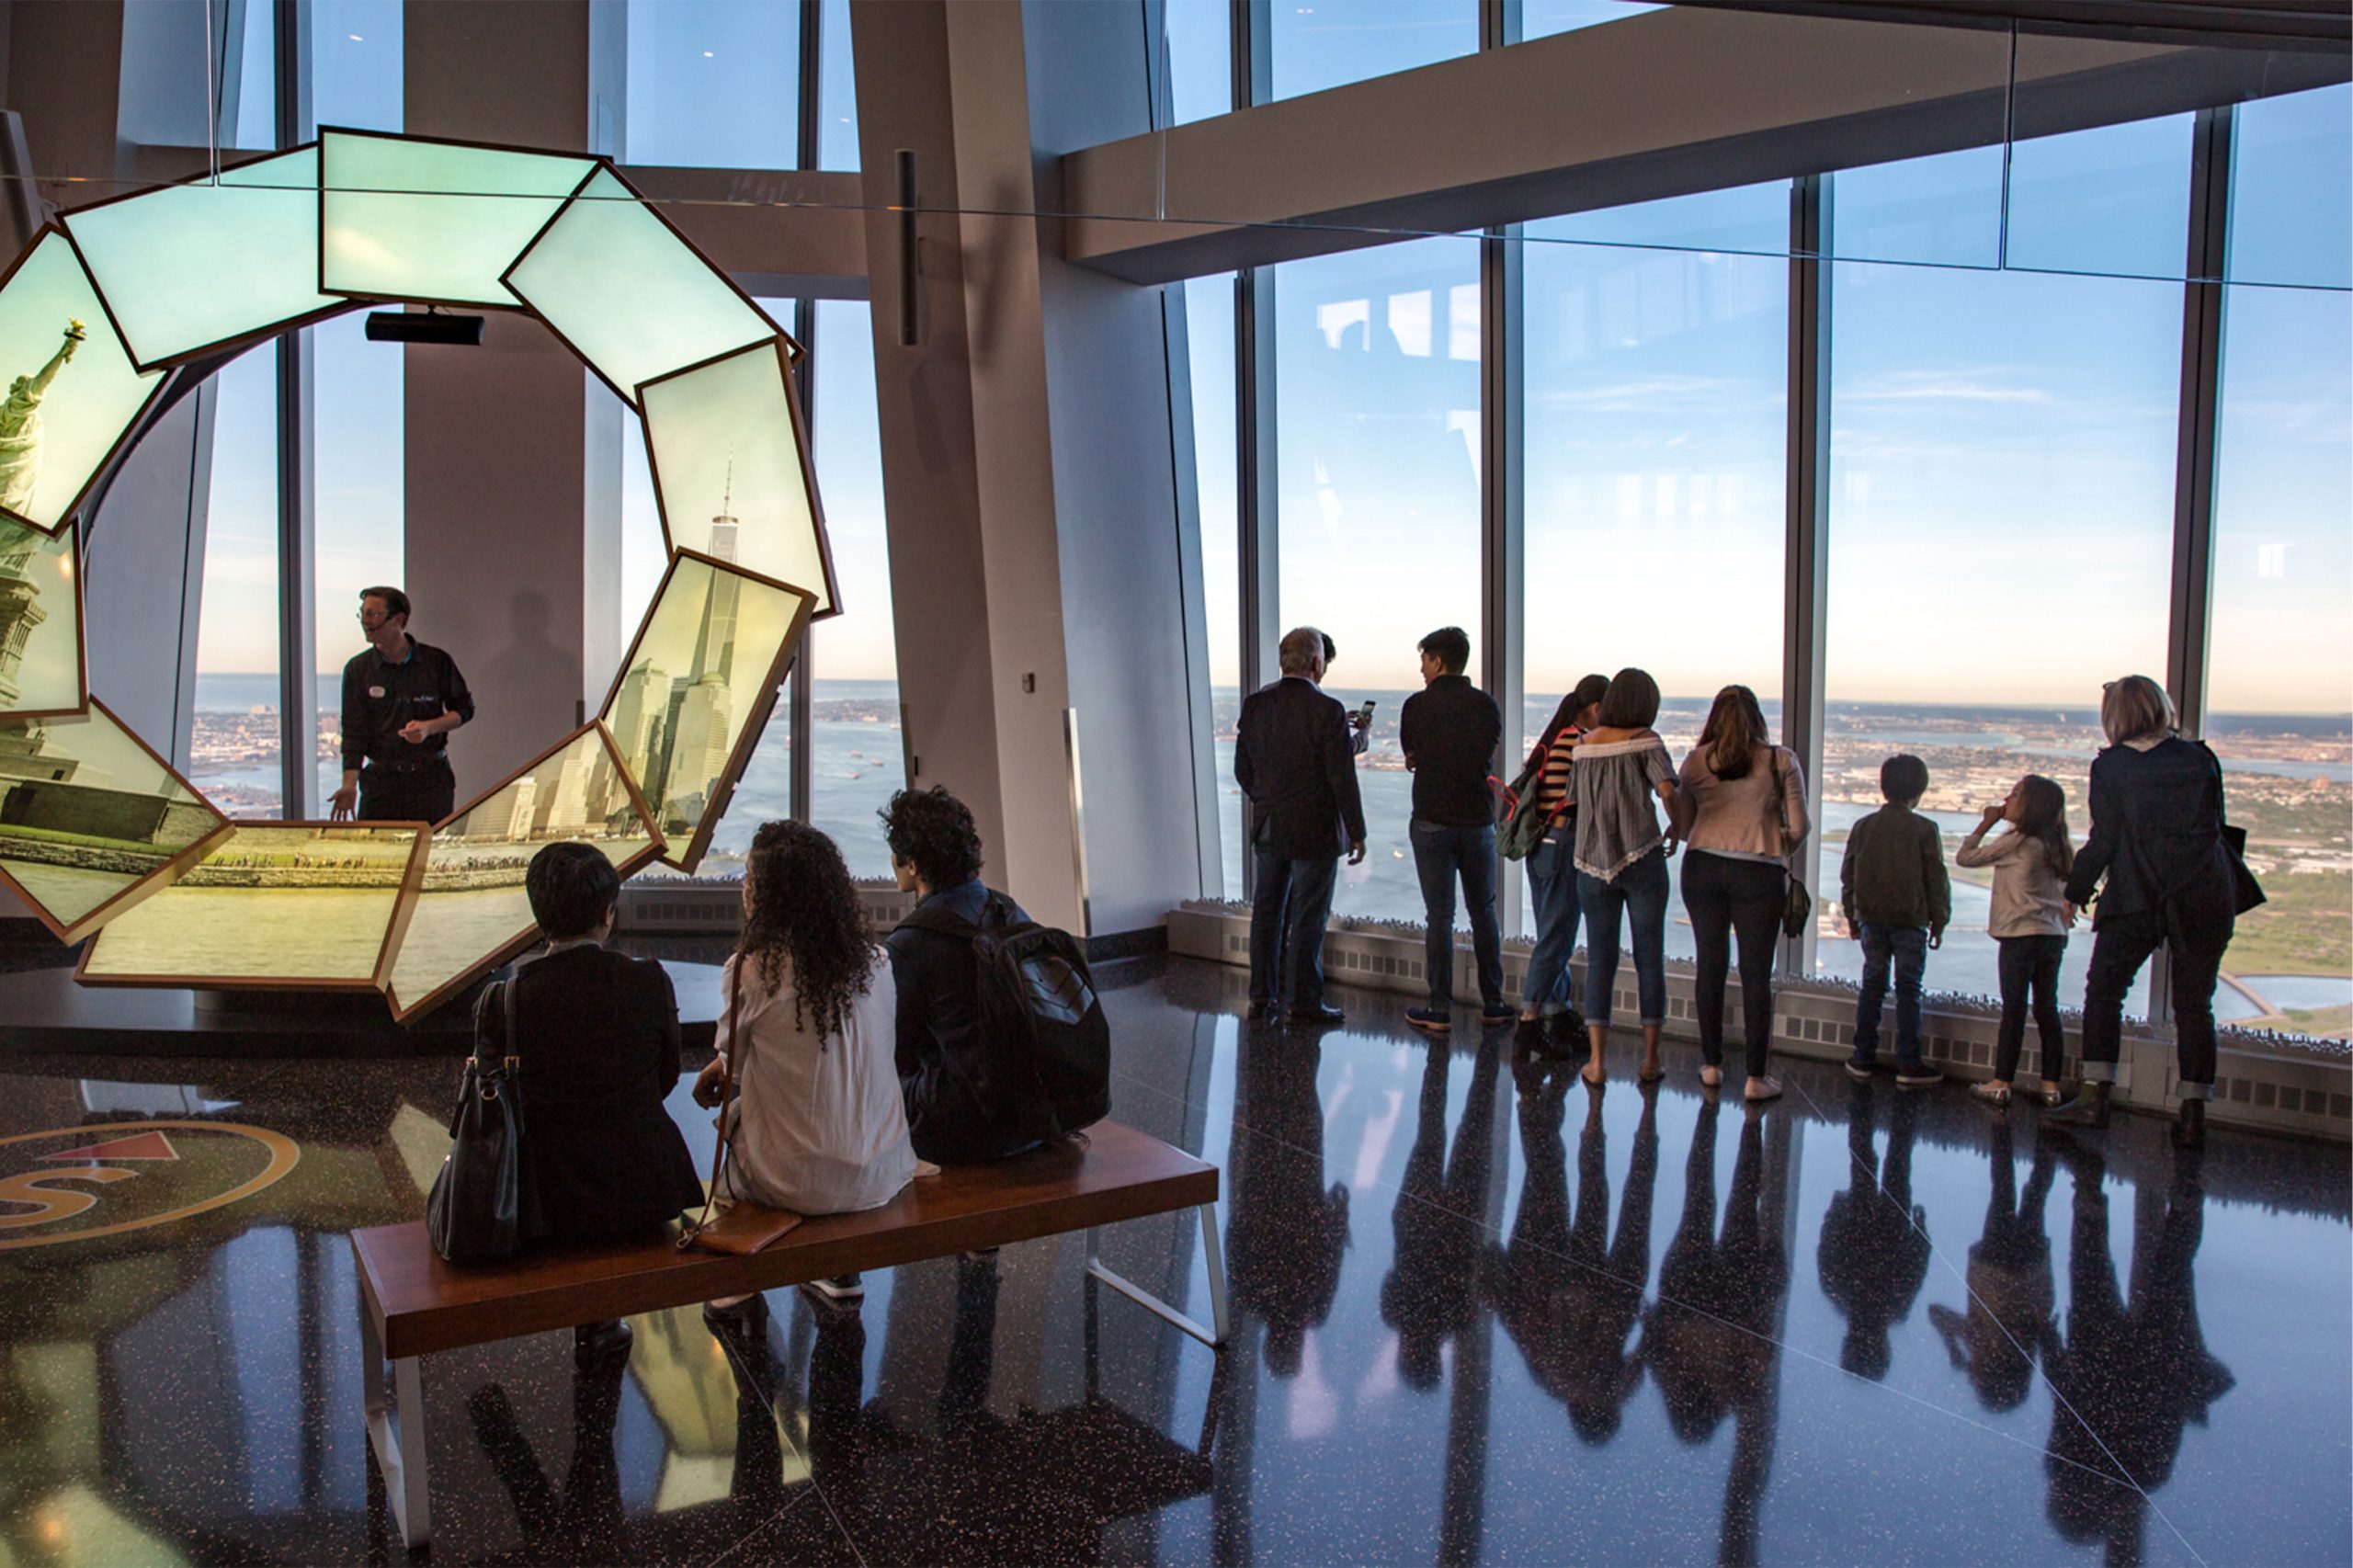 A crowd enjoying a presentation at City Pulse and the 360 view of New York City.